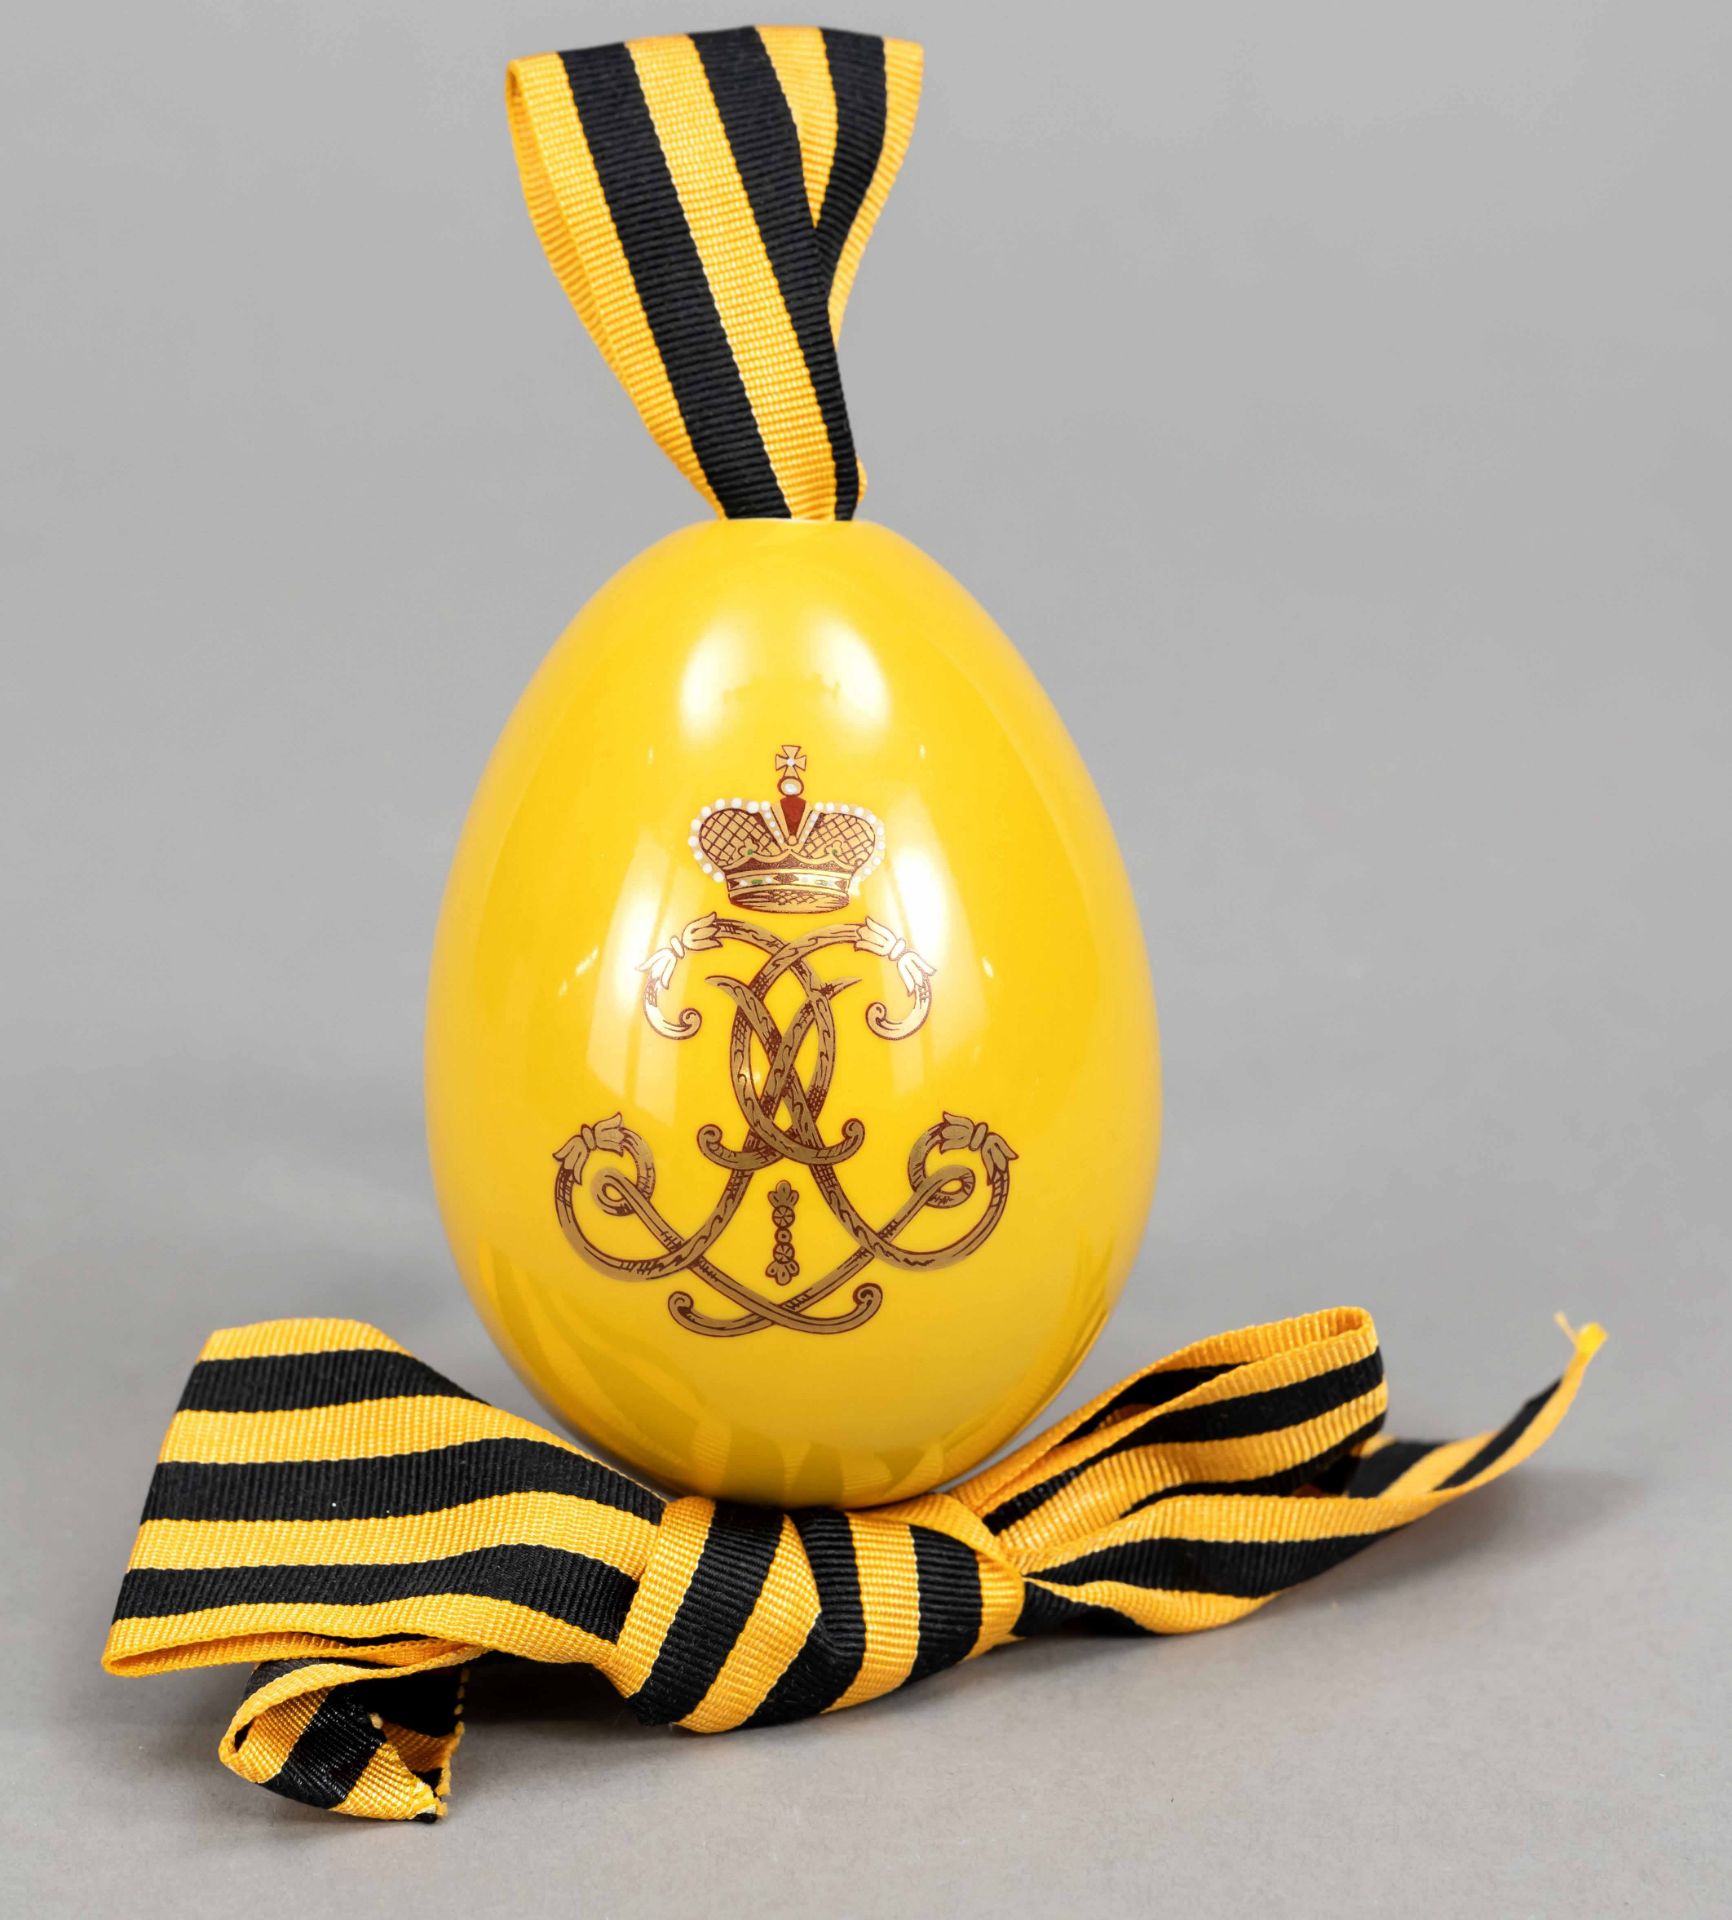 Easter egg, Russia, yellow egg with the coat of arms of the Romanoff family, on the verso monogram - Image 2 of 2